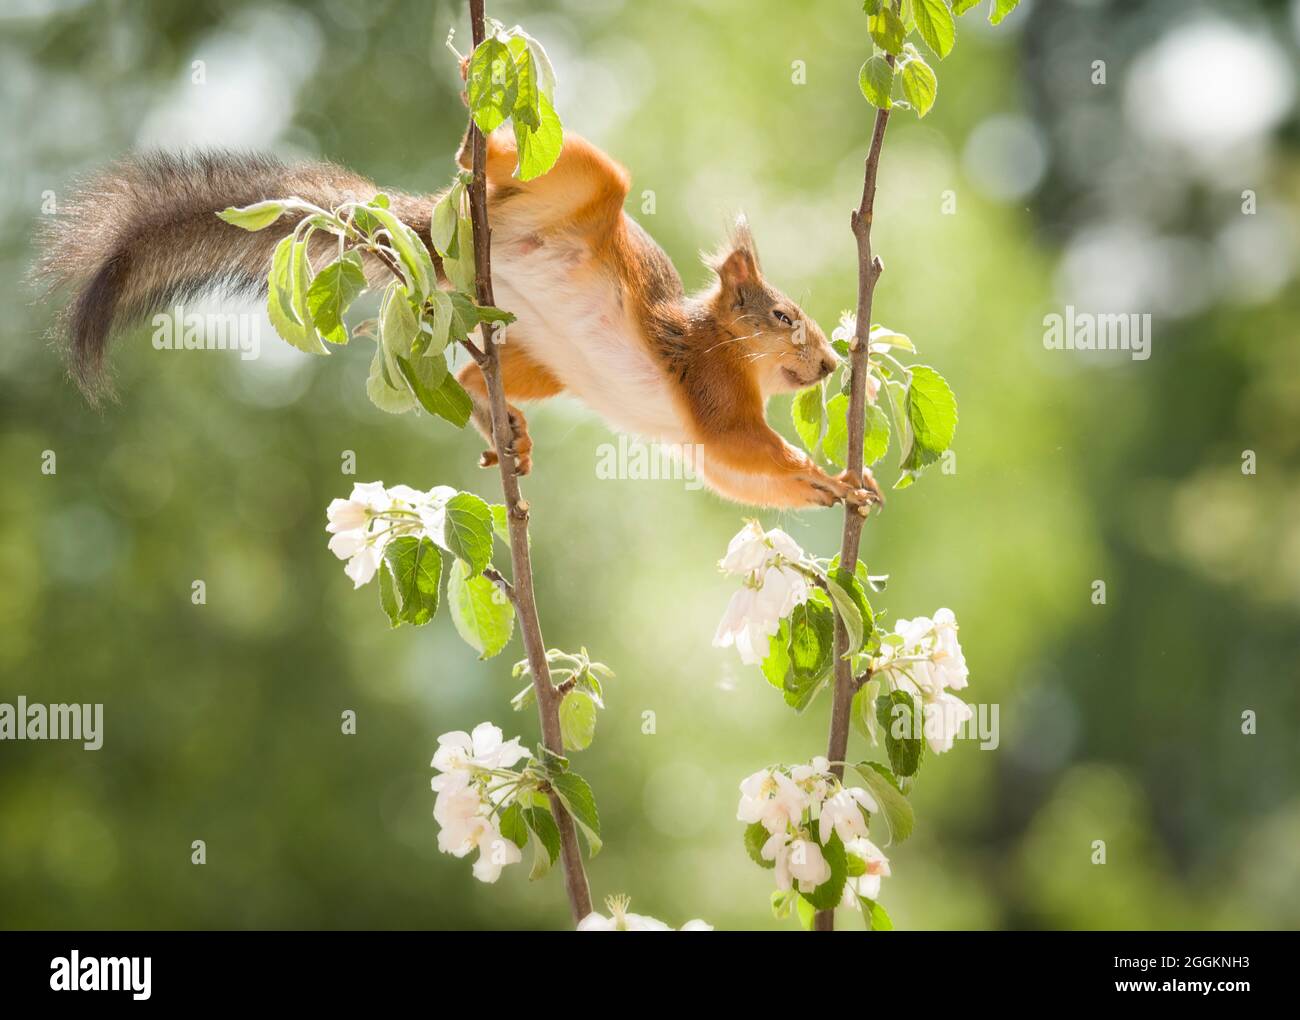 red squirrel holding apple flower branches Stock Photo